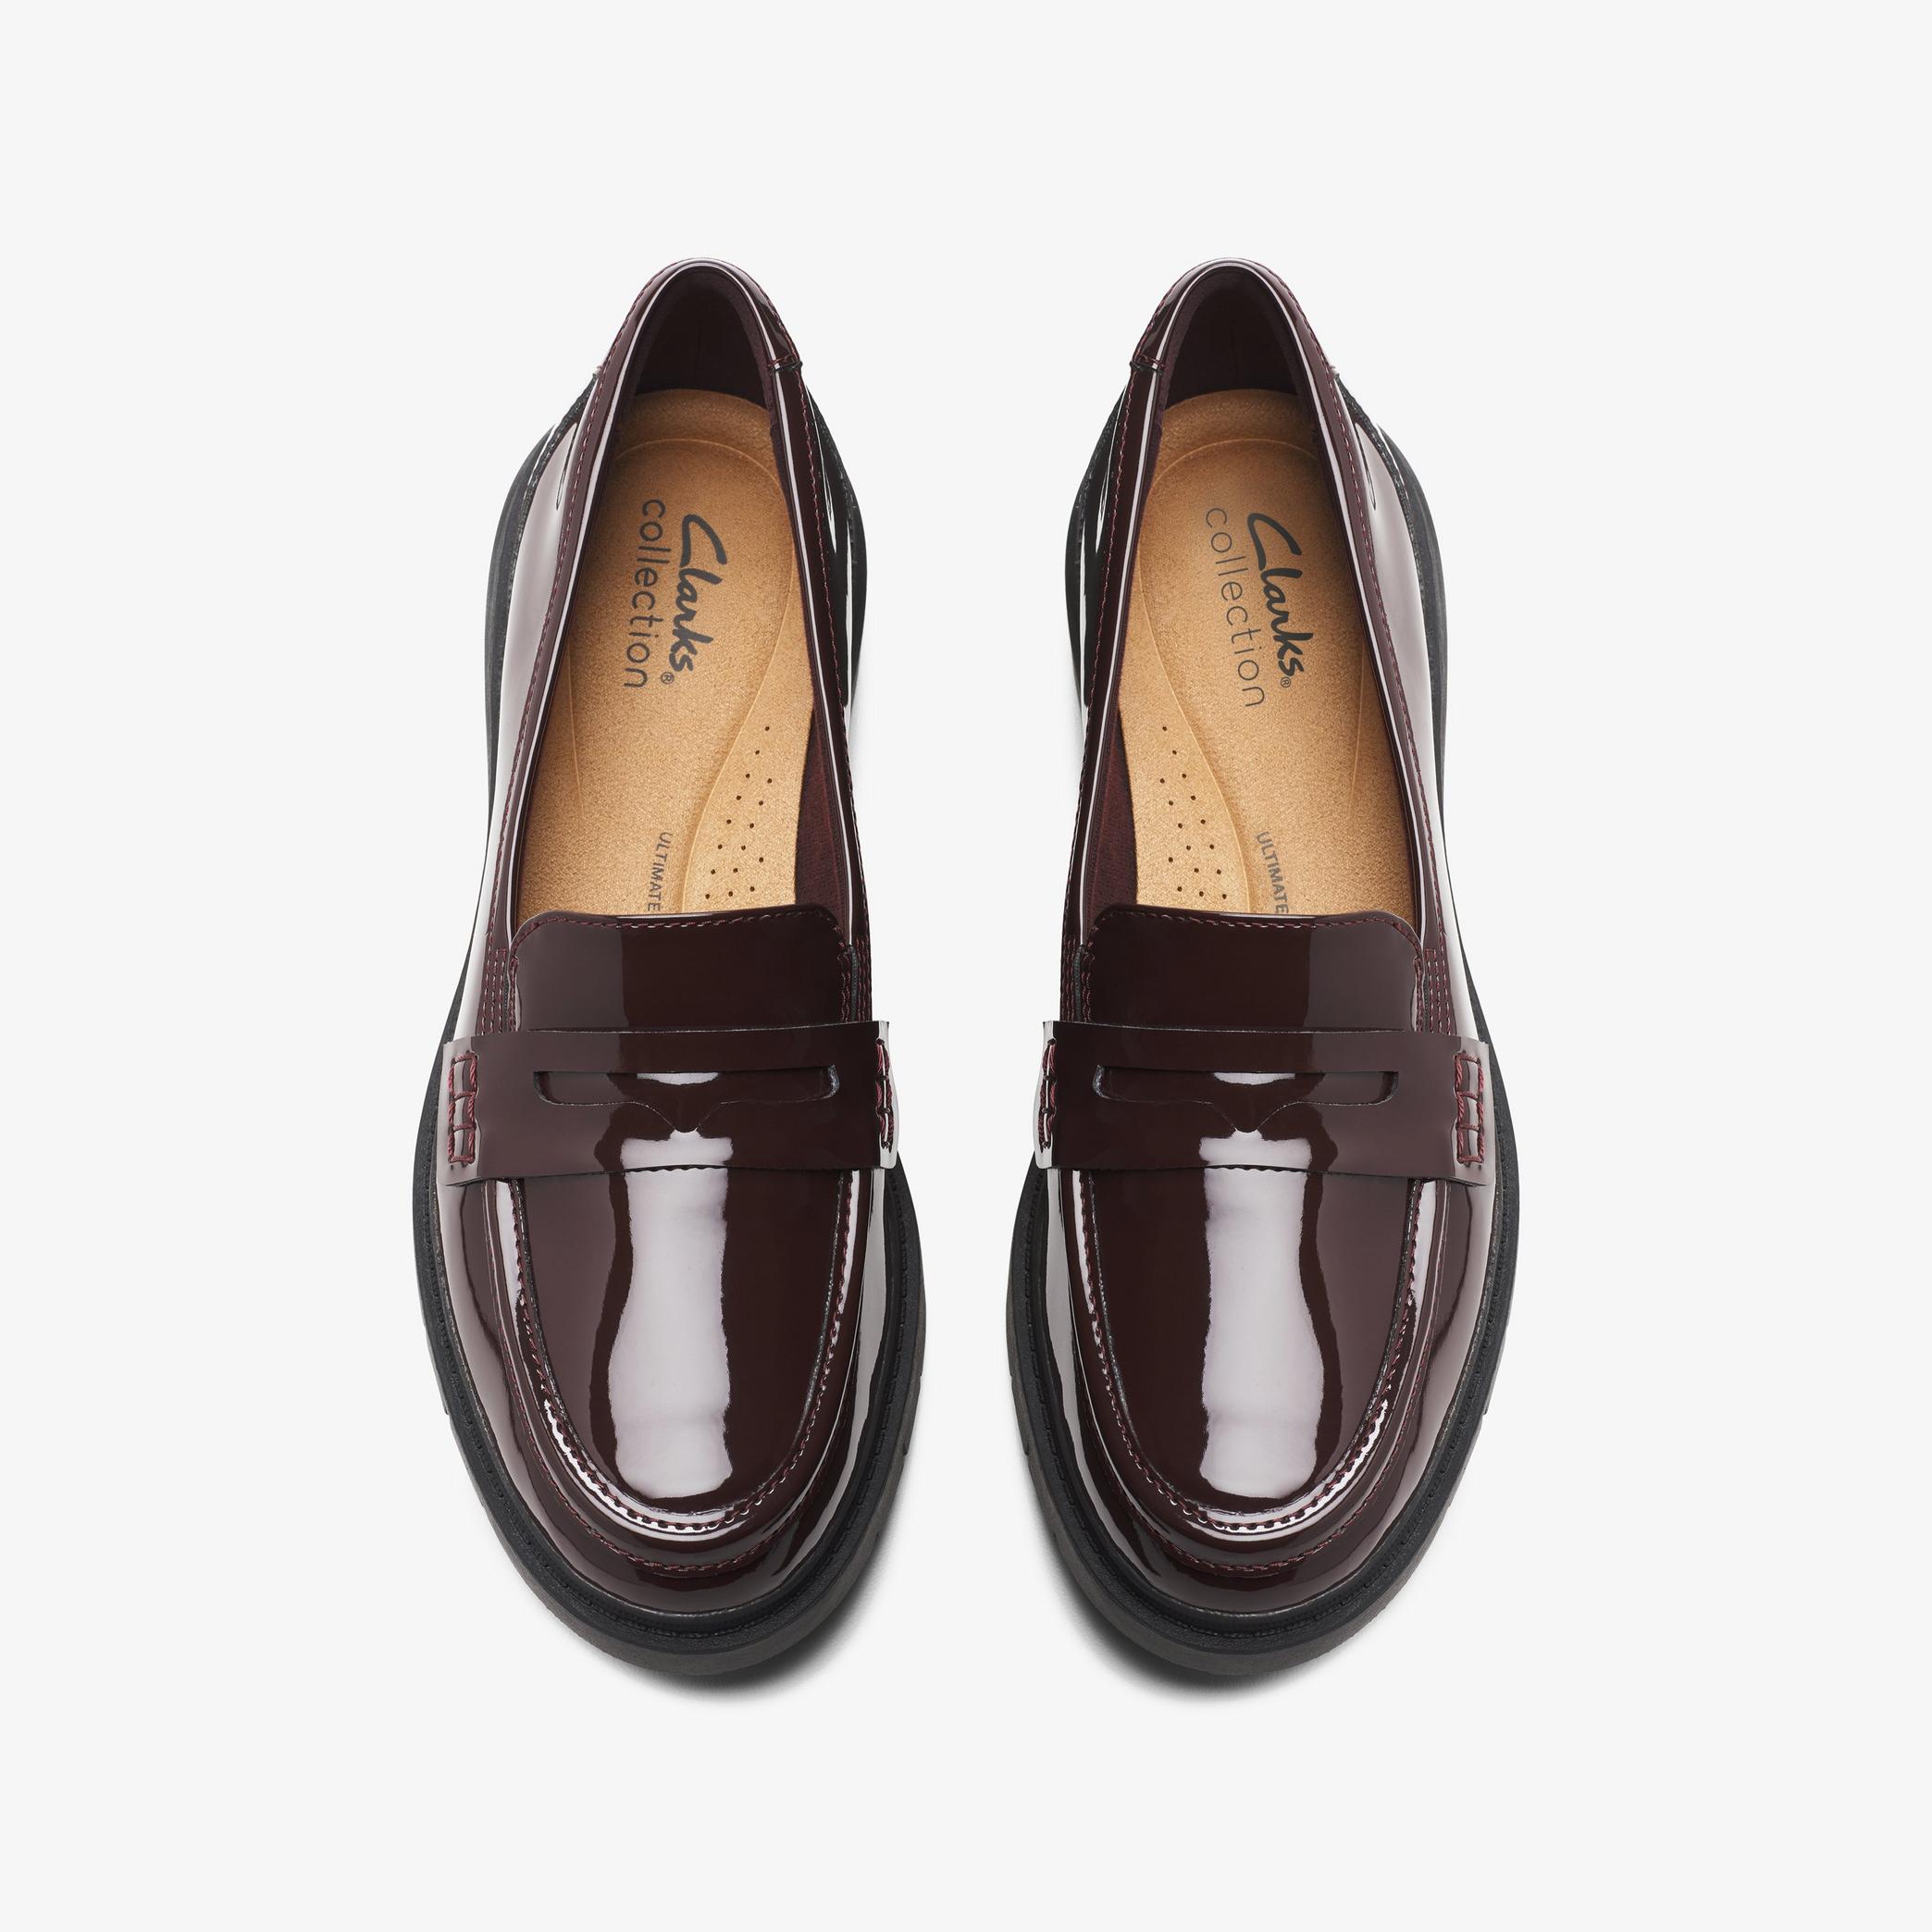 Westlynn Ayla Burgundy Patent Loafers, view 6 of 6